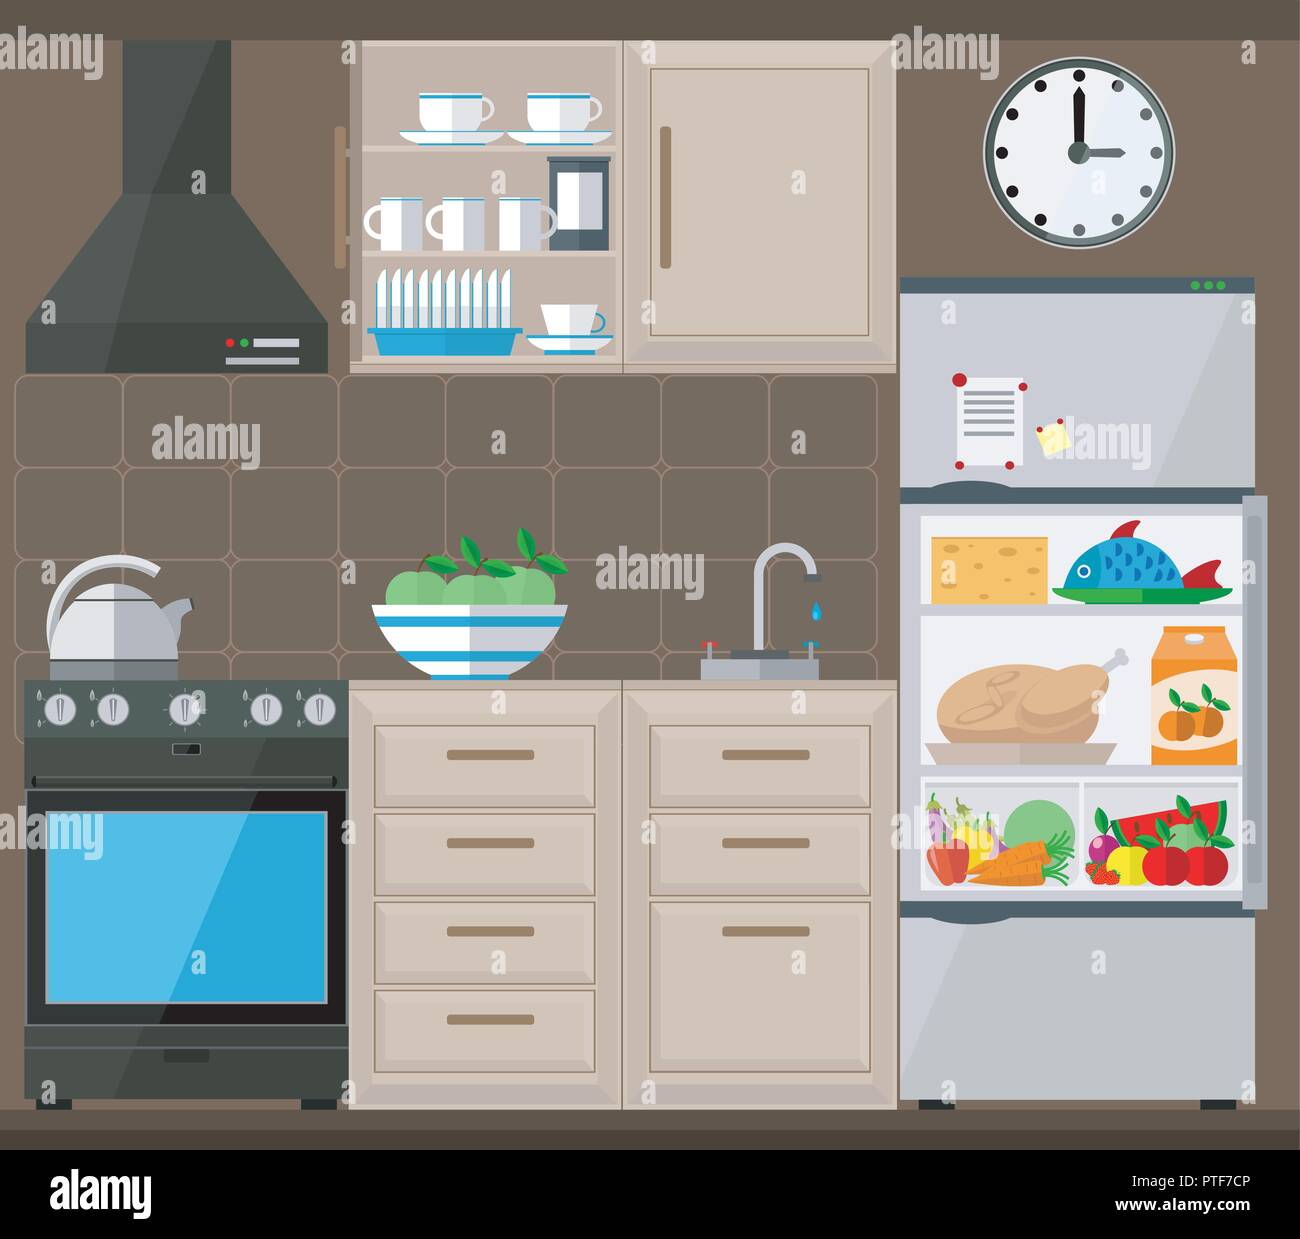 There is also a kitchen, equipped with a fridge and stovetop. Vector illustration. Stock Vector